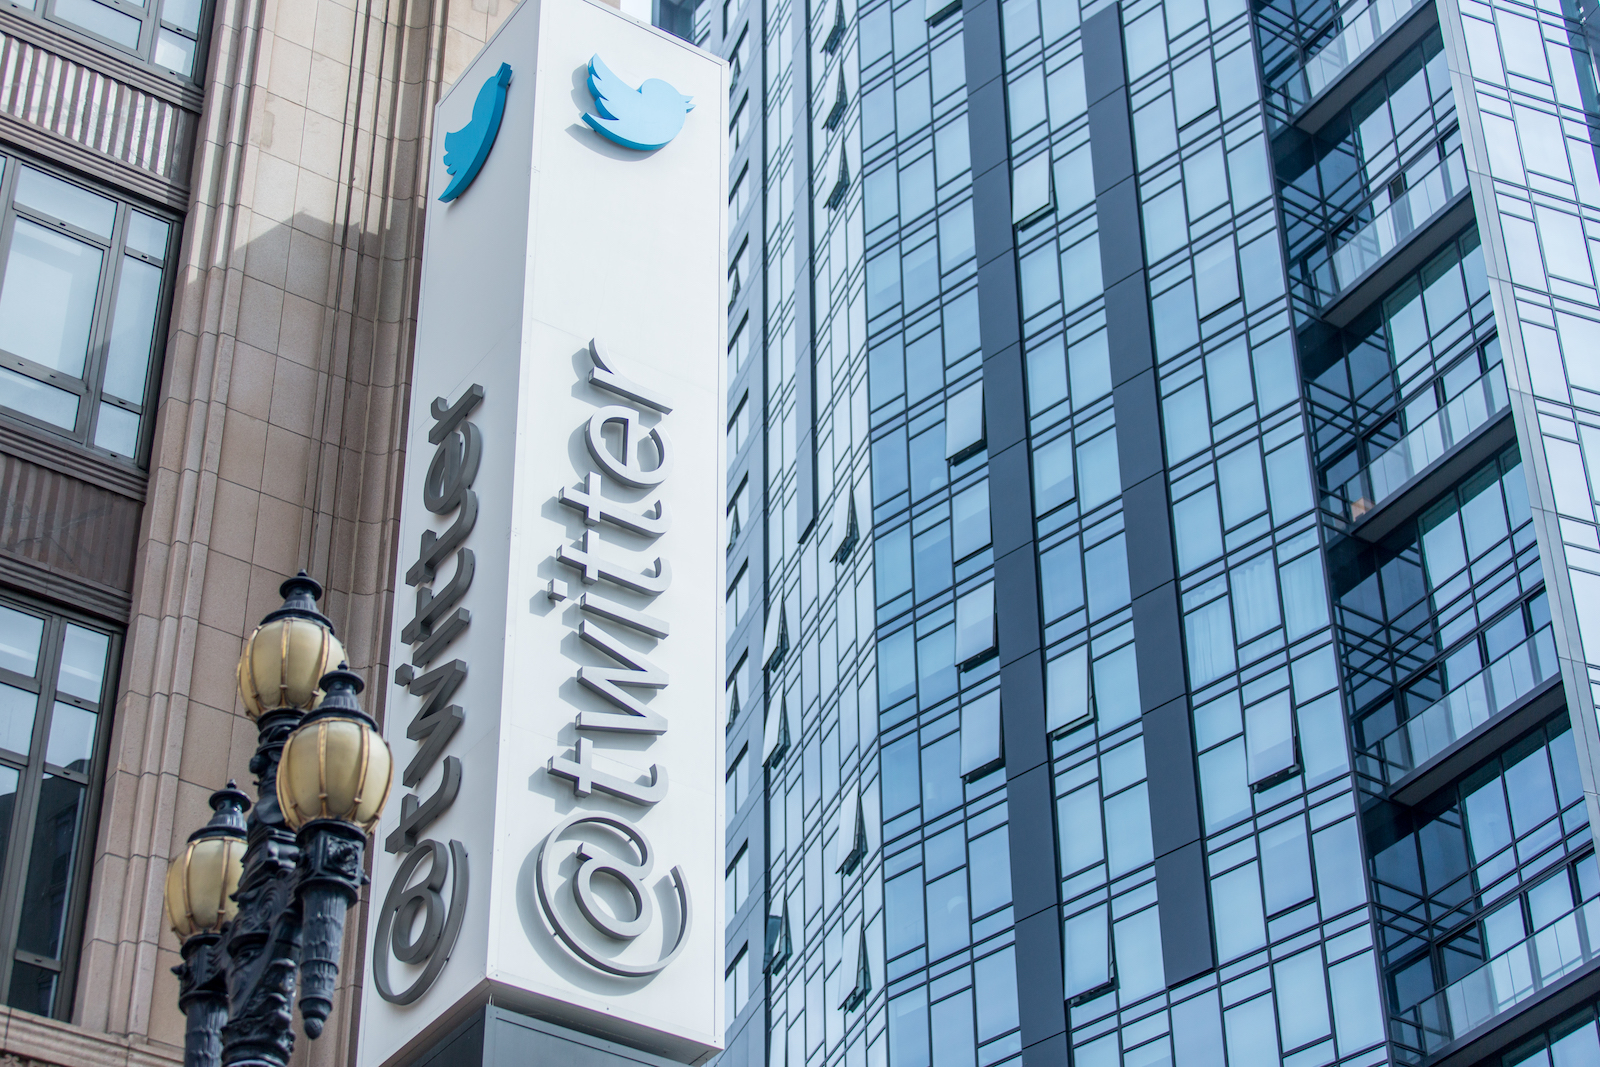 Twitter headquarters, located at1355 Market St, Suite 900 San Francisco, CA 94103